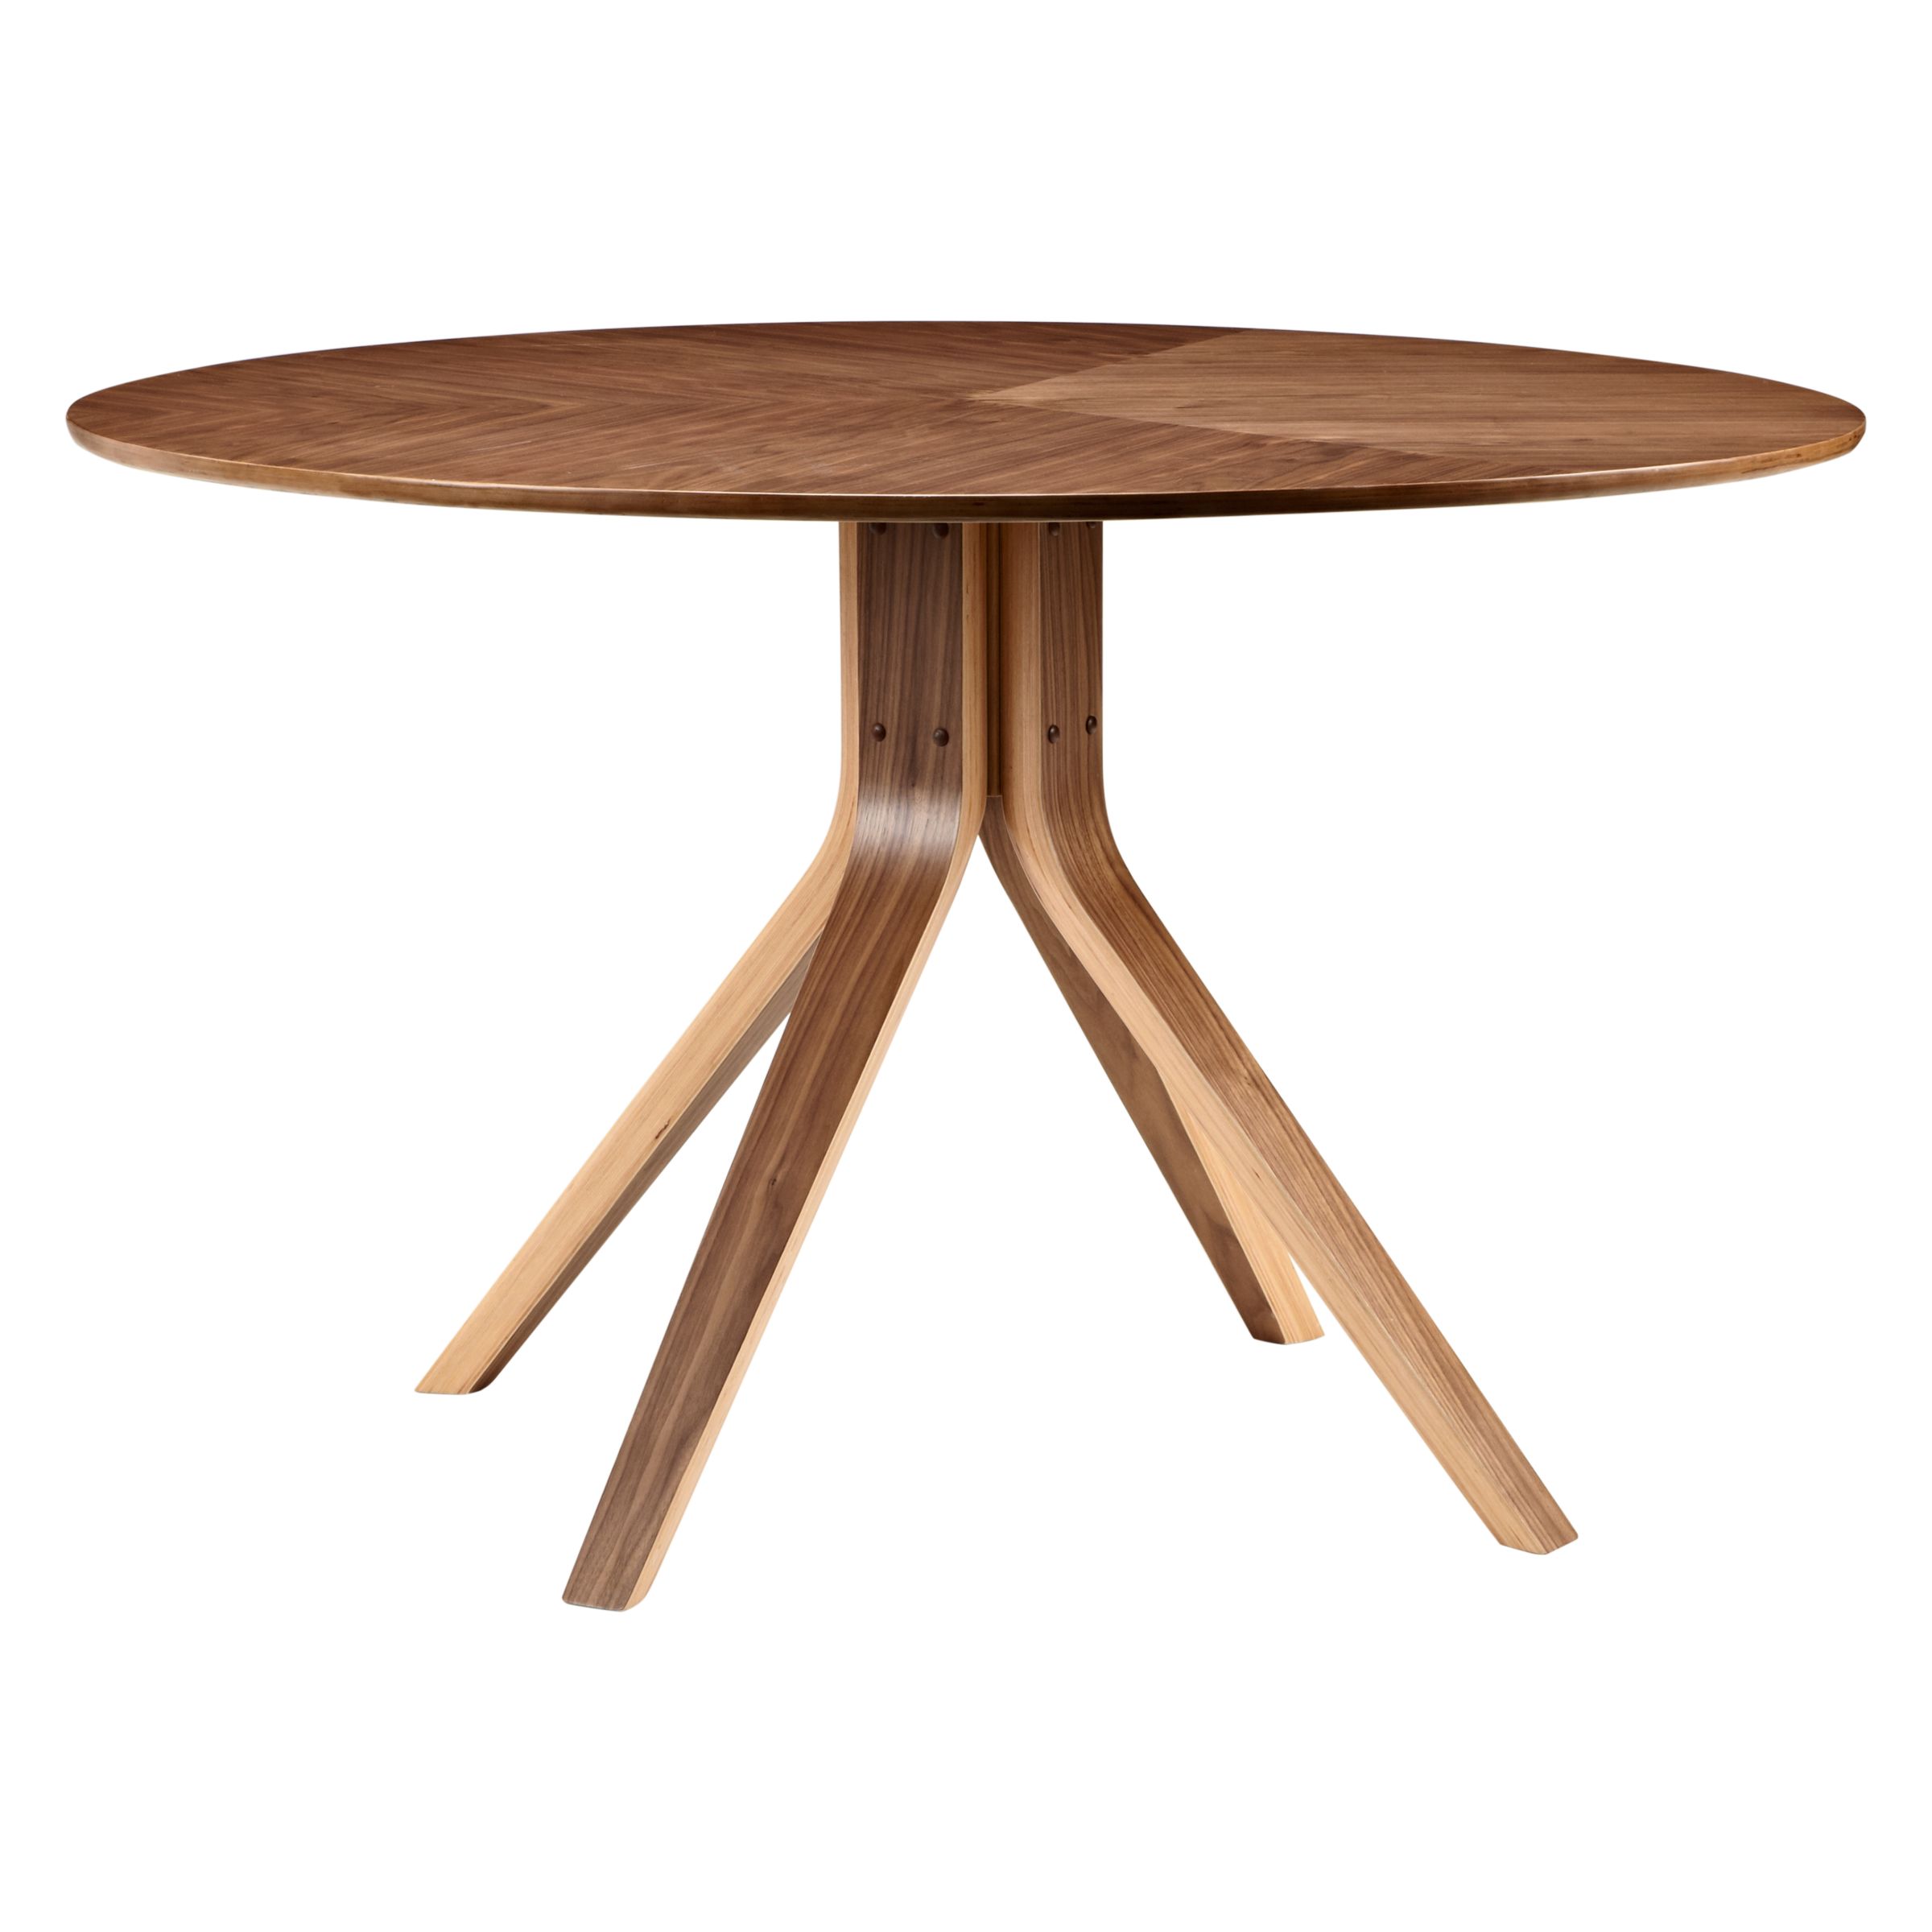 House by John Lewis Radar 6 Seater Round Dining Table, Walnut